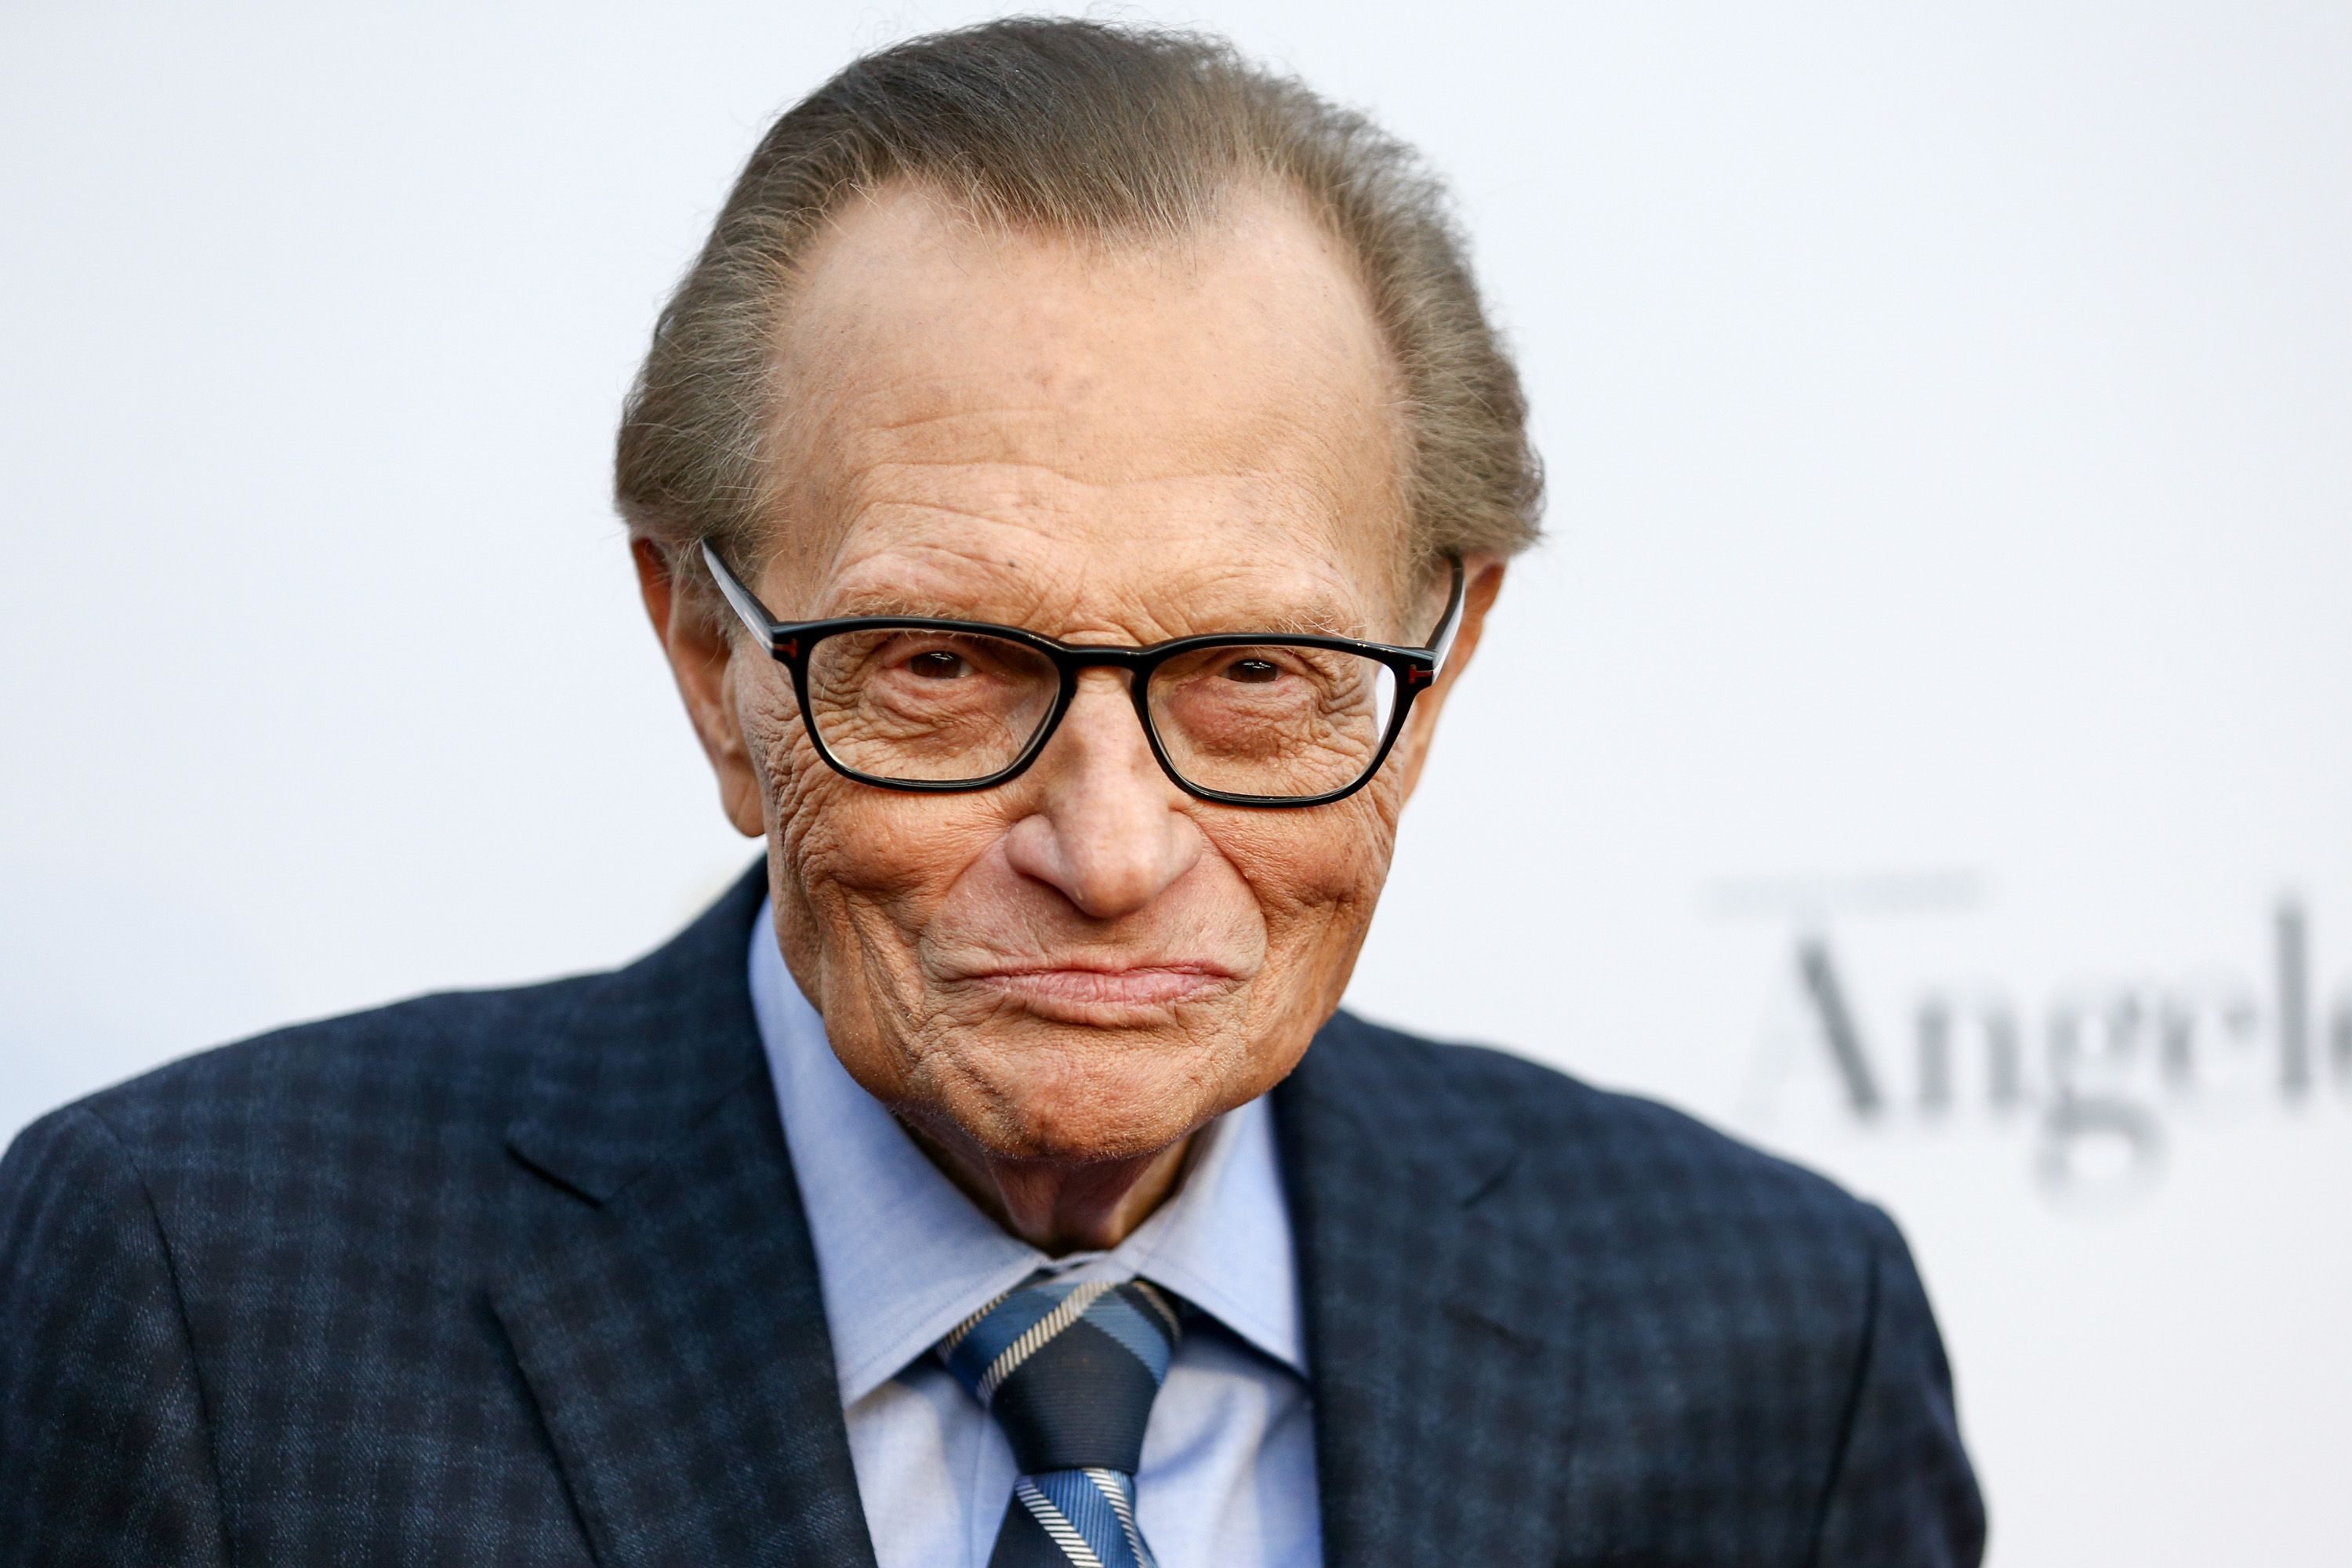 Television and radio host Larry King at the "Larry King" 60th Broadcasting Anniversary Event at HYDE Sunset: Kitchen + Cocktails in West Hollywood, California | Photo: Rich Fury/Getty Images